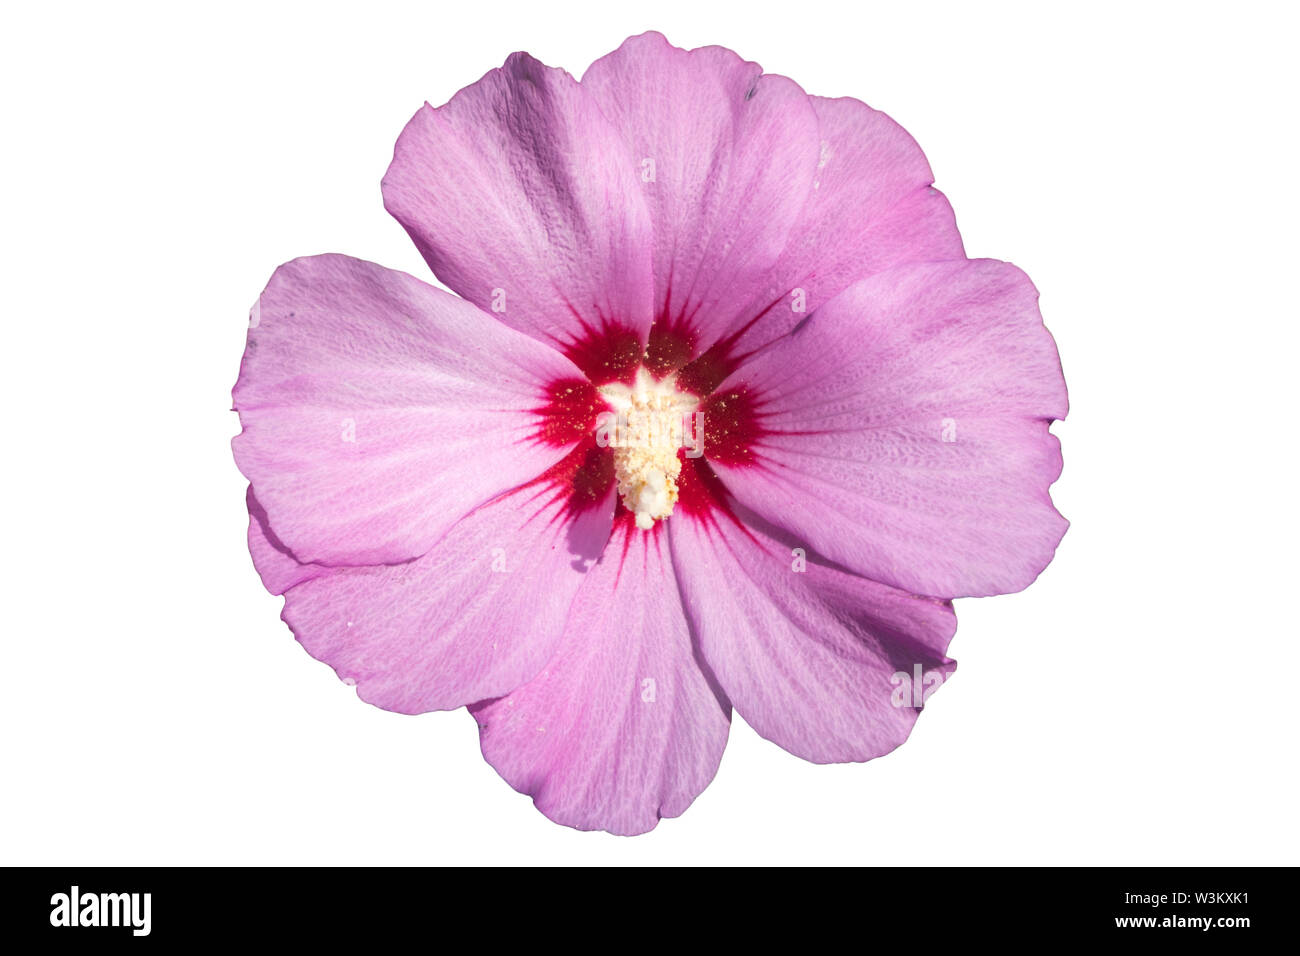 Syrian ketmia pink with deep red centre rose of Sharon 'Hamabo' flower isolated on white. Stock Photo